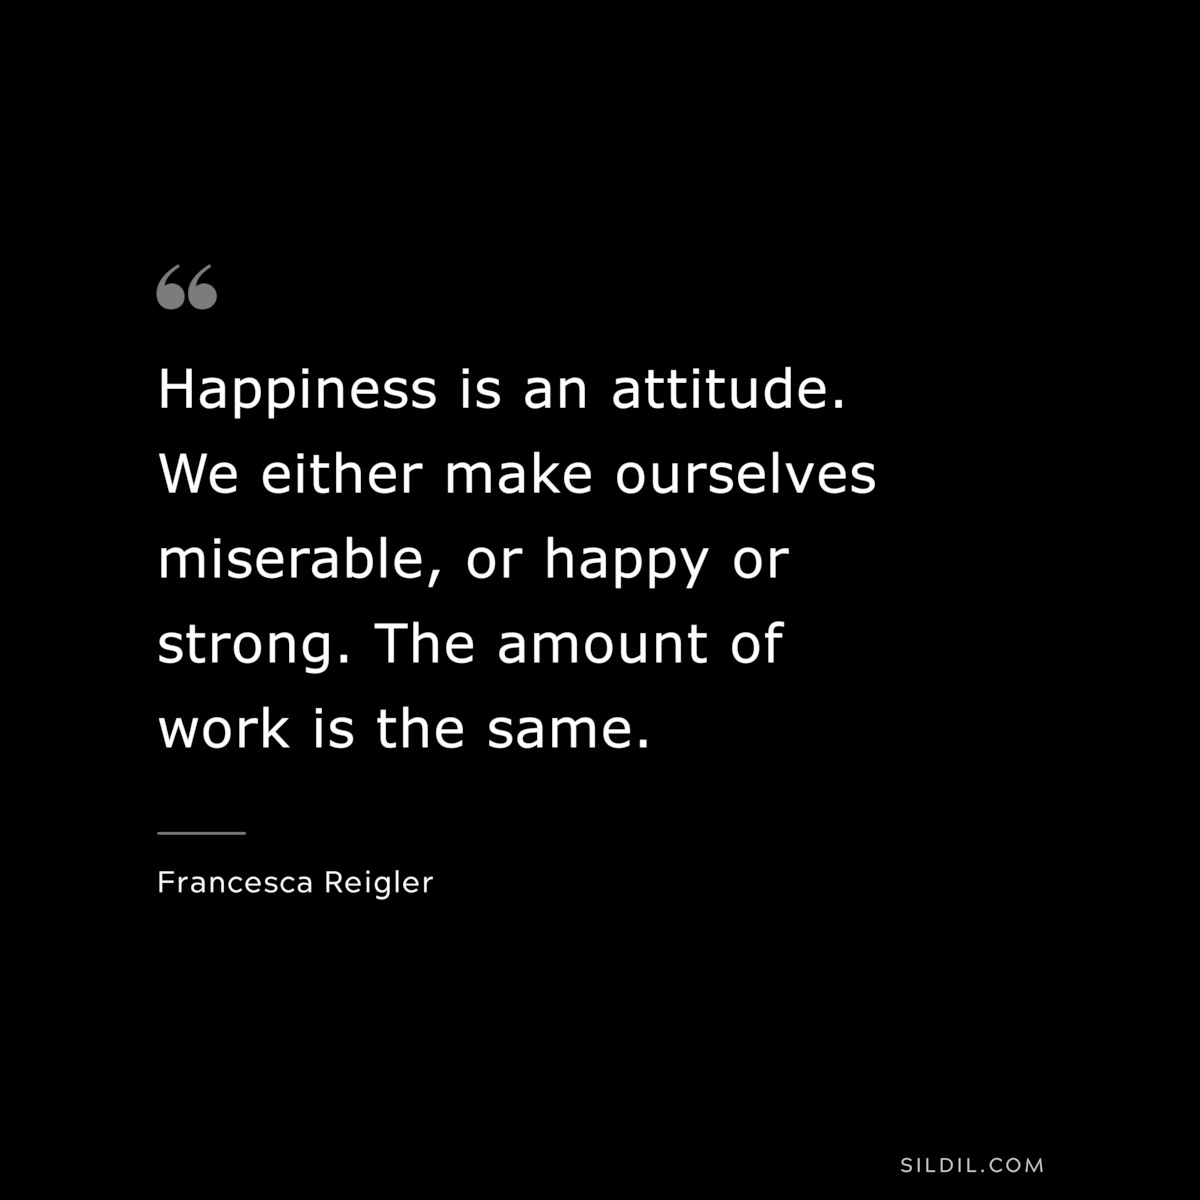 Happiness is an attitude. We either make ourselves miserable, or happy or strong. The amount of work is the same. ― Francesca Reigler